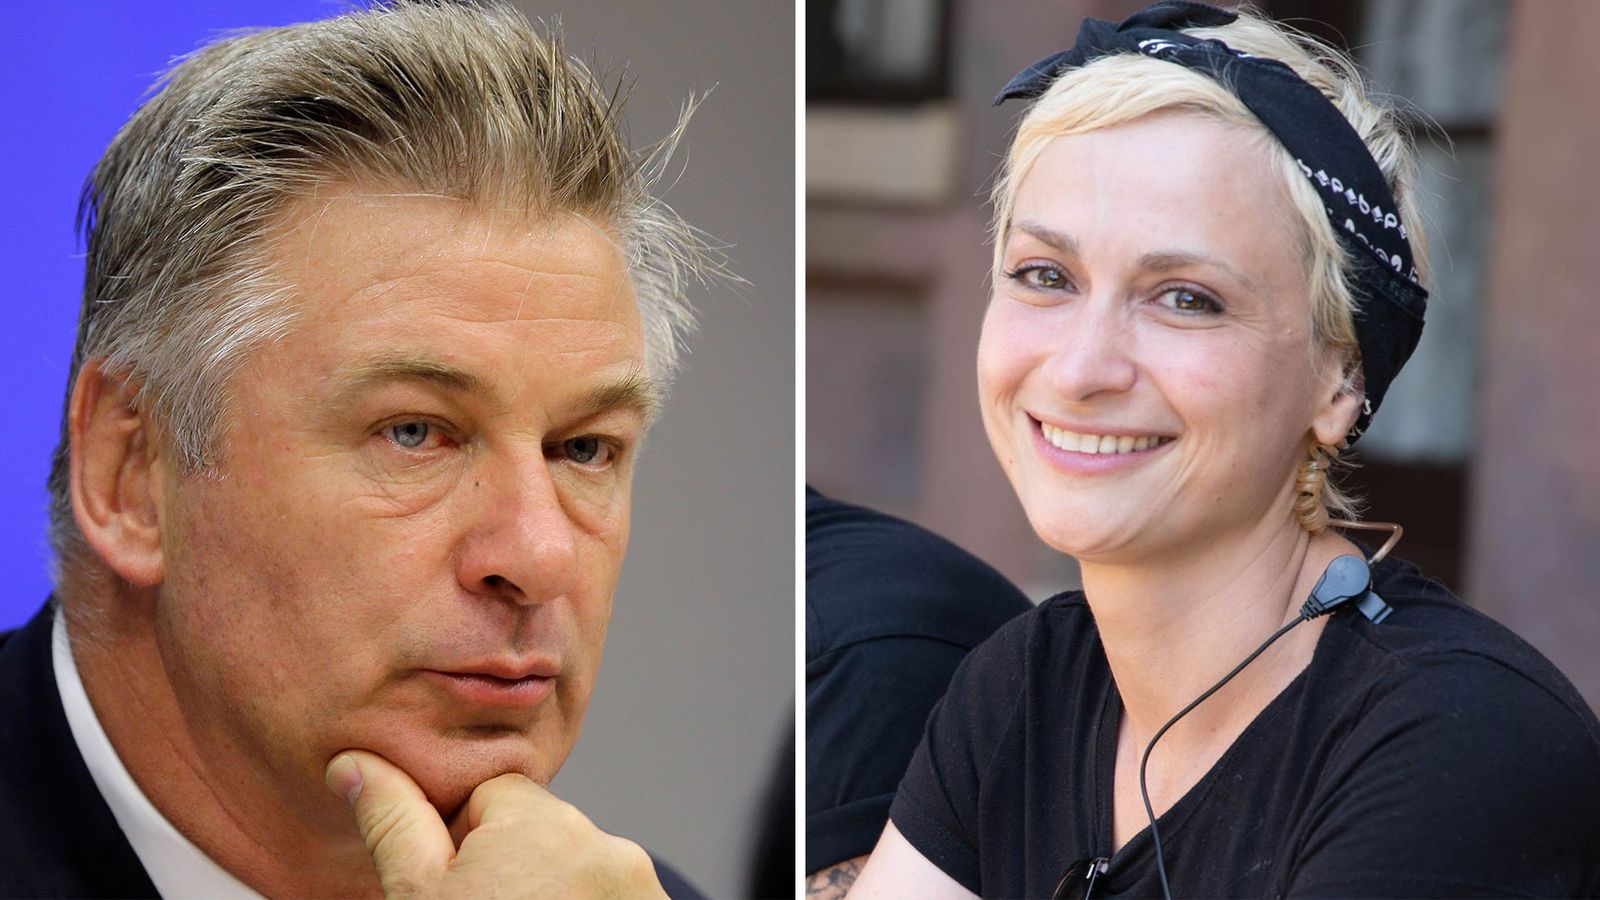 Alec Baldwin and the late cinematographer Halyna Hutchins died on the set of Baldwin's 'pet project' Rust